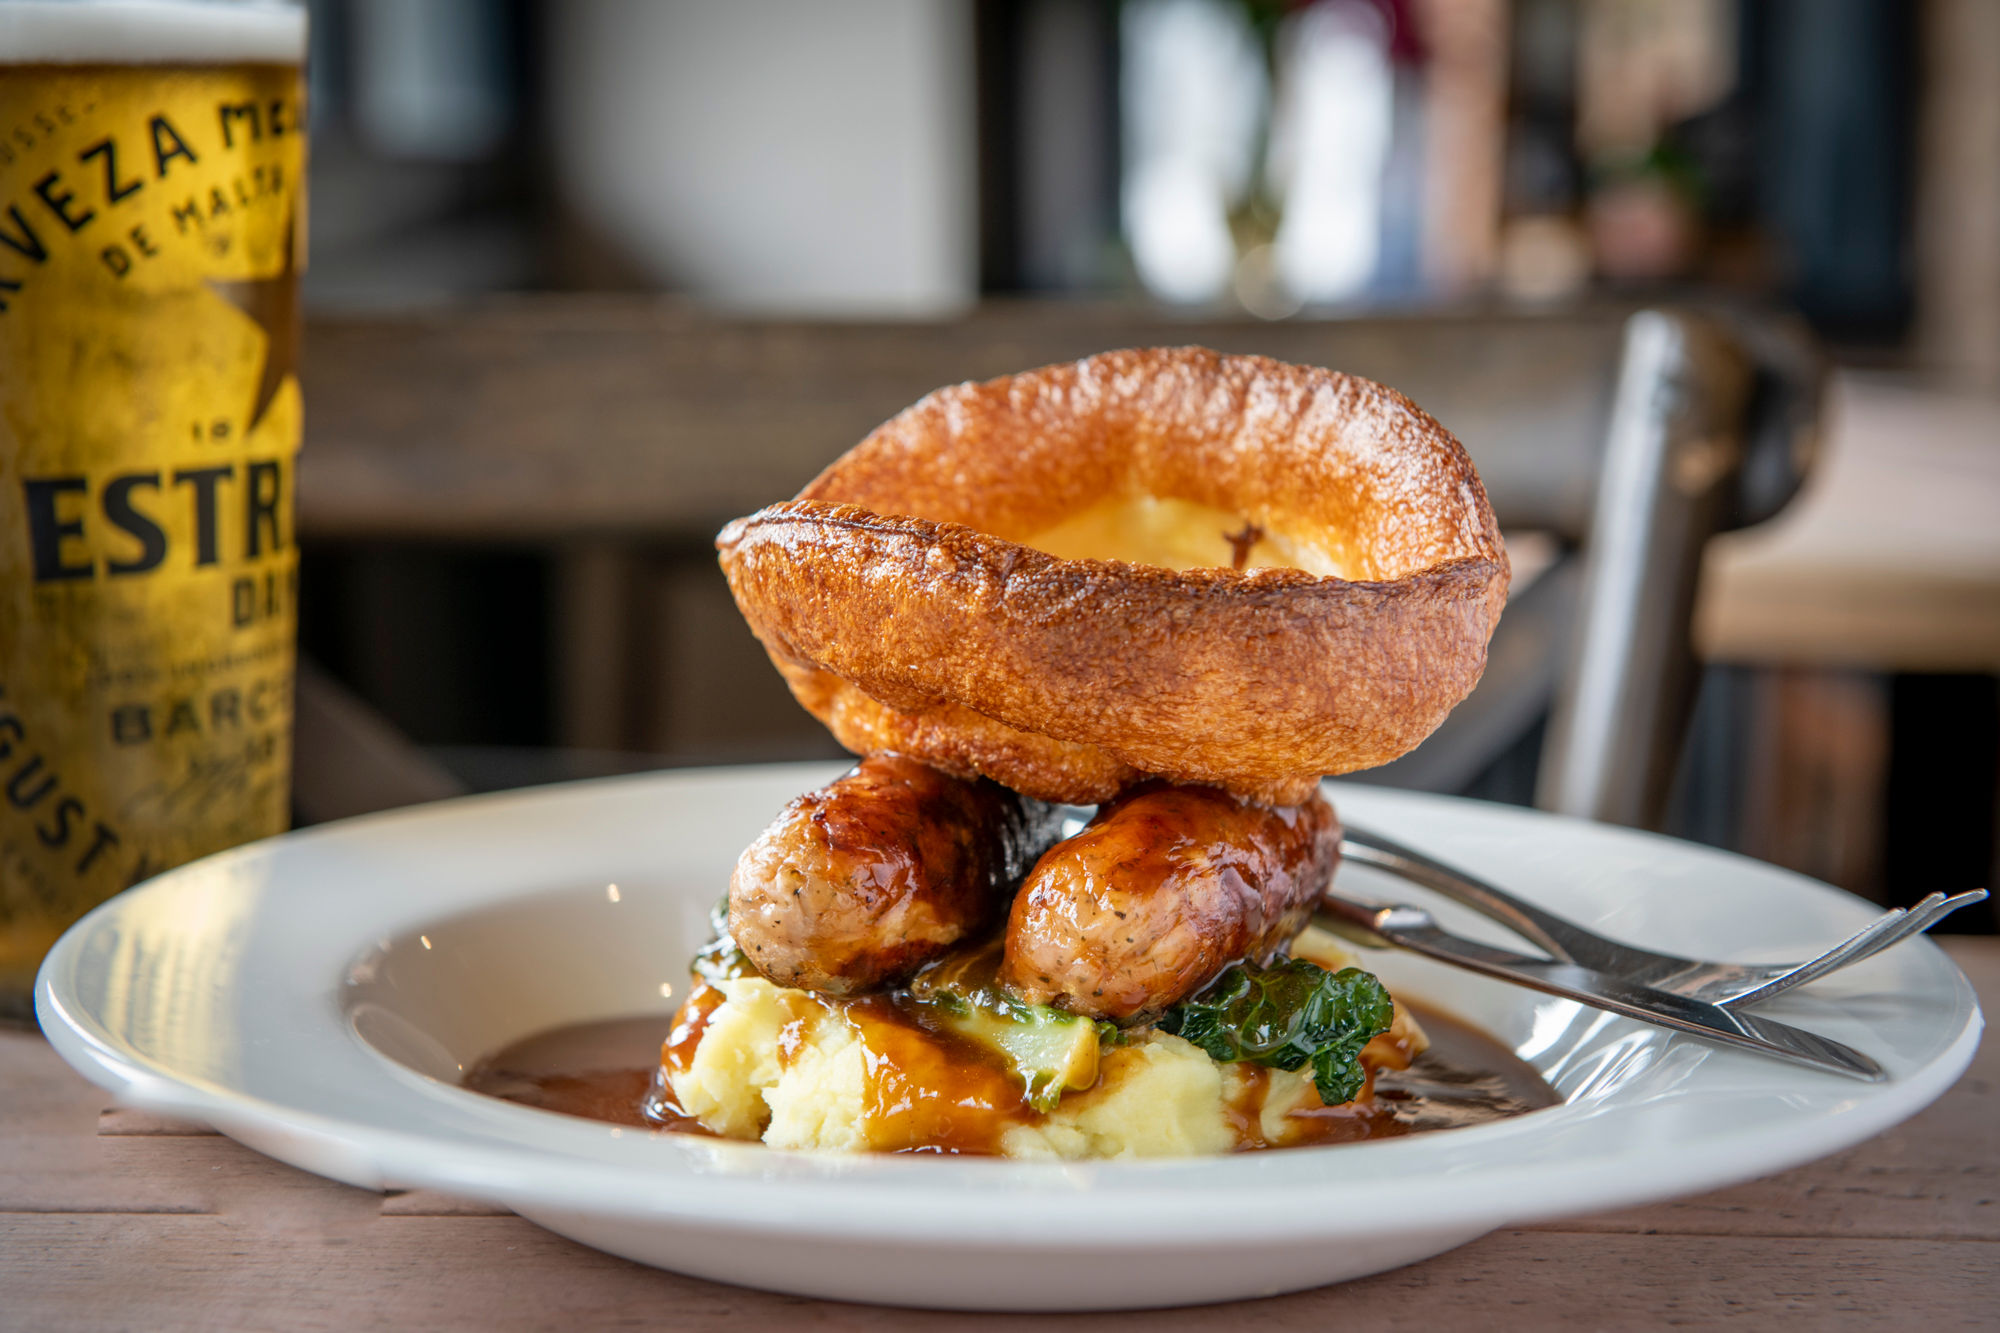 Two sausages on top of a pile of mashed potato with a large Yorkshire pudding. Serve with gravy on a white plate.